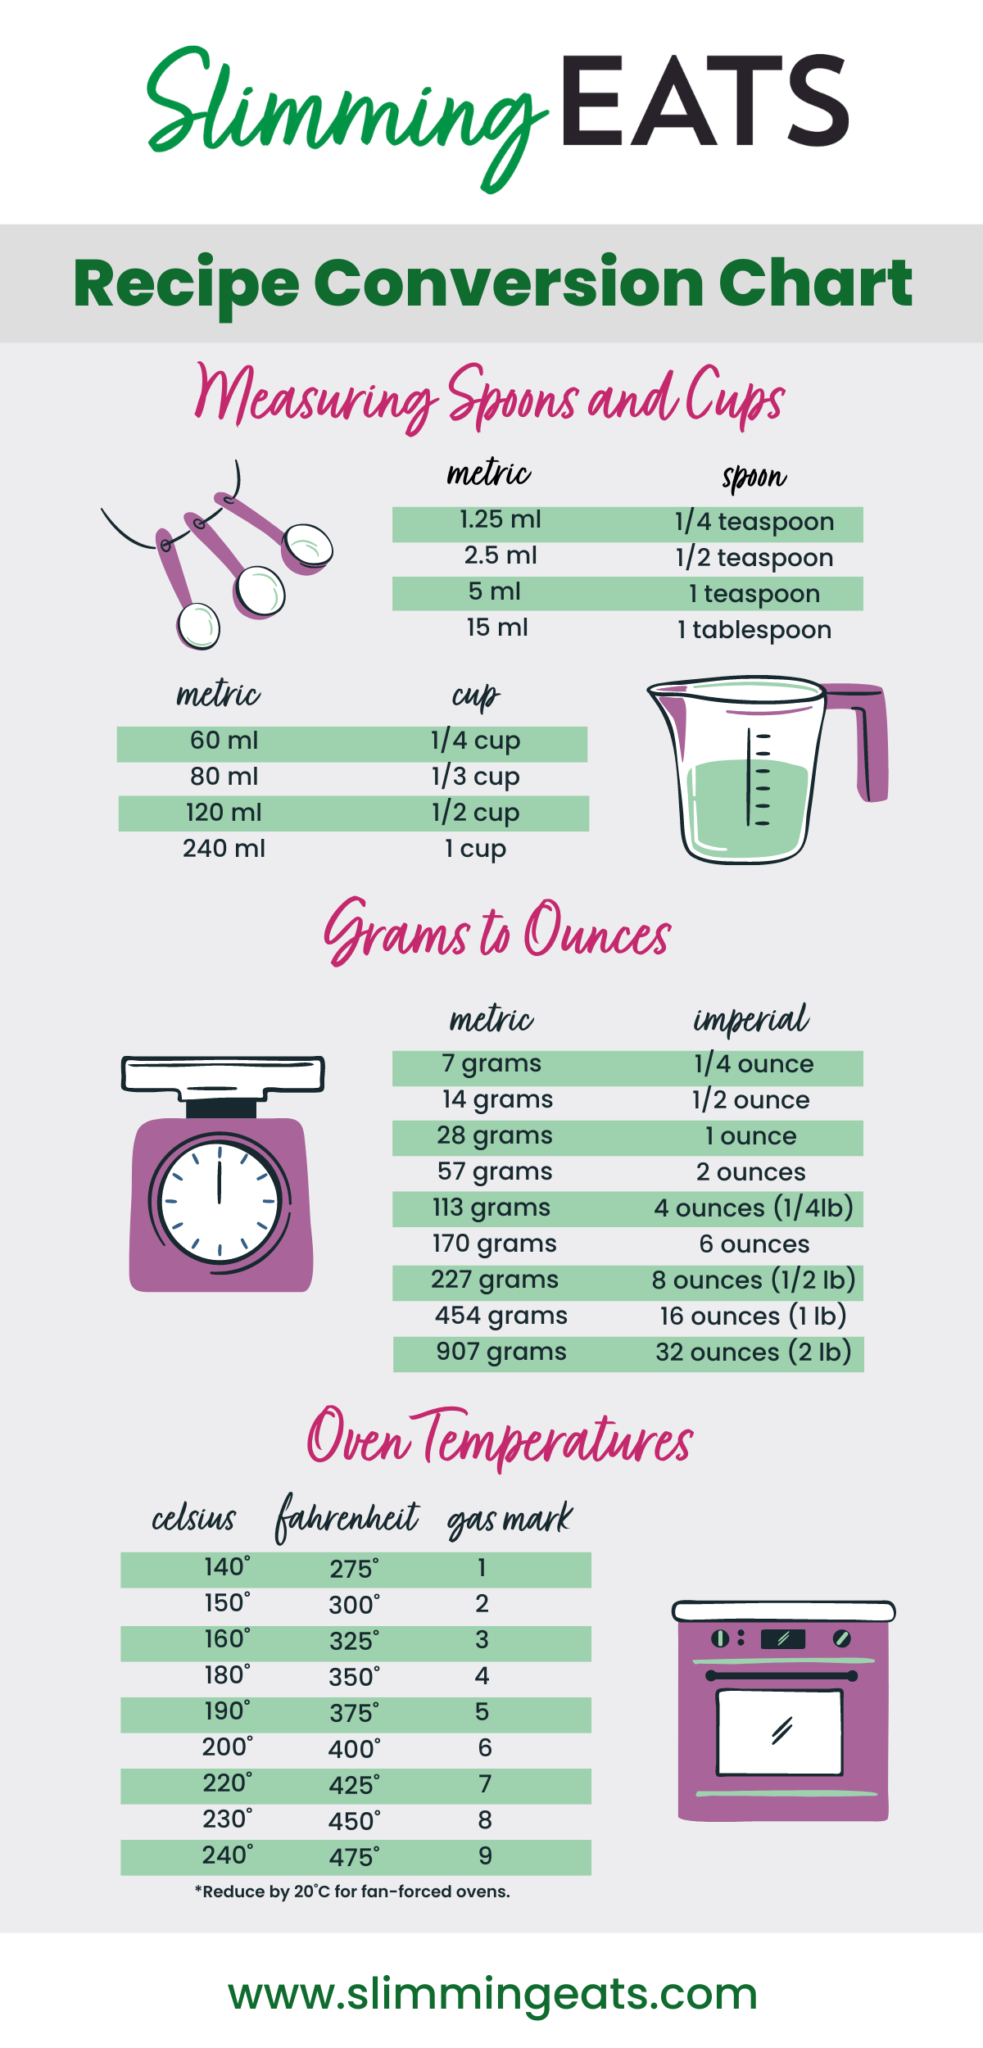 This is a simple chart on how to convert grams to cups in cooking